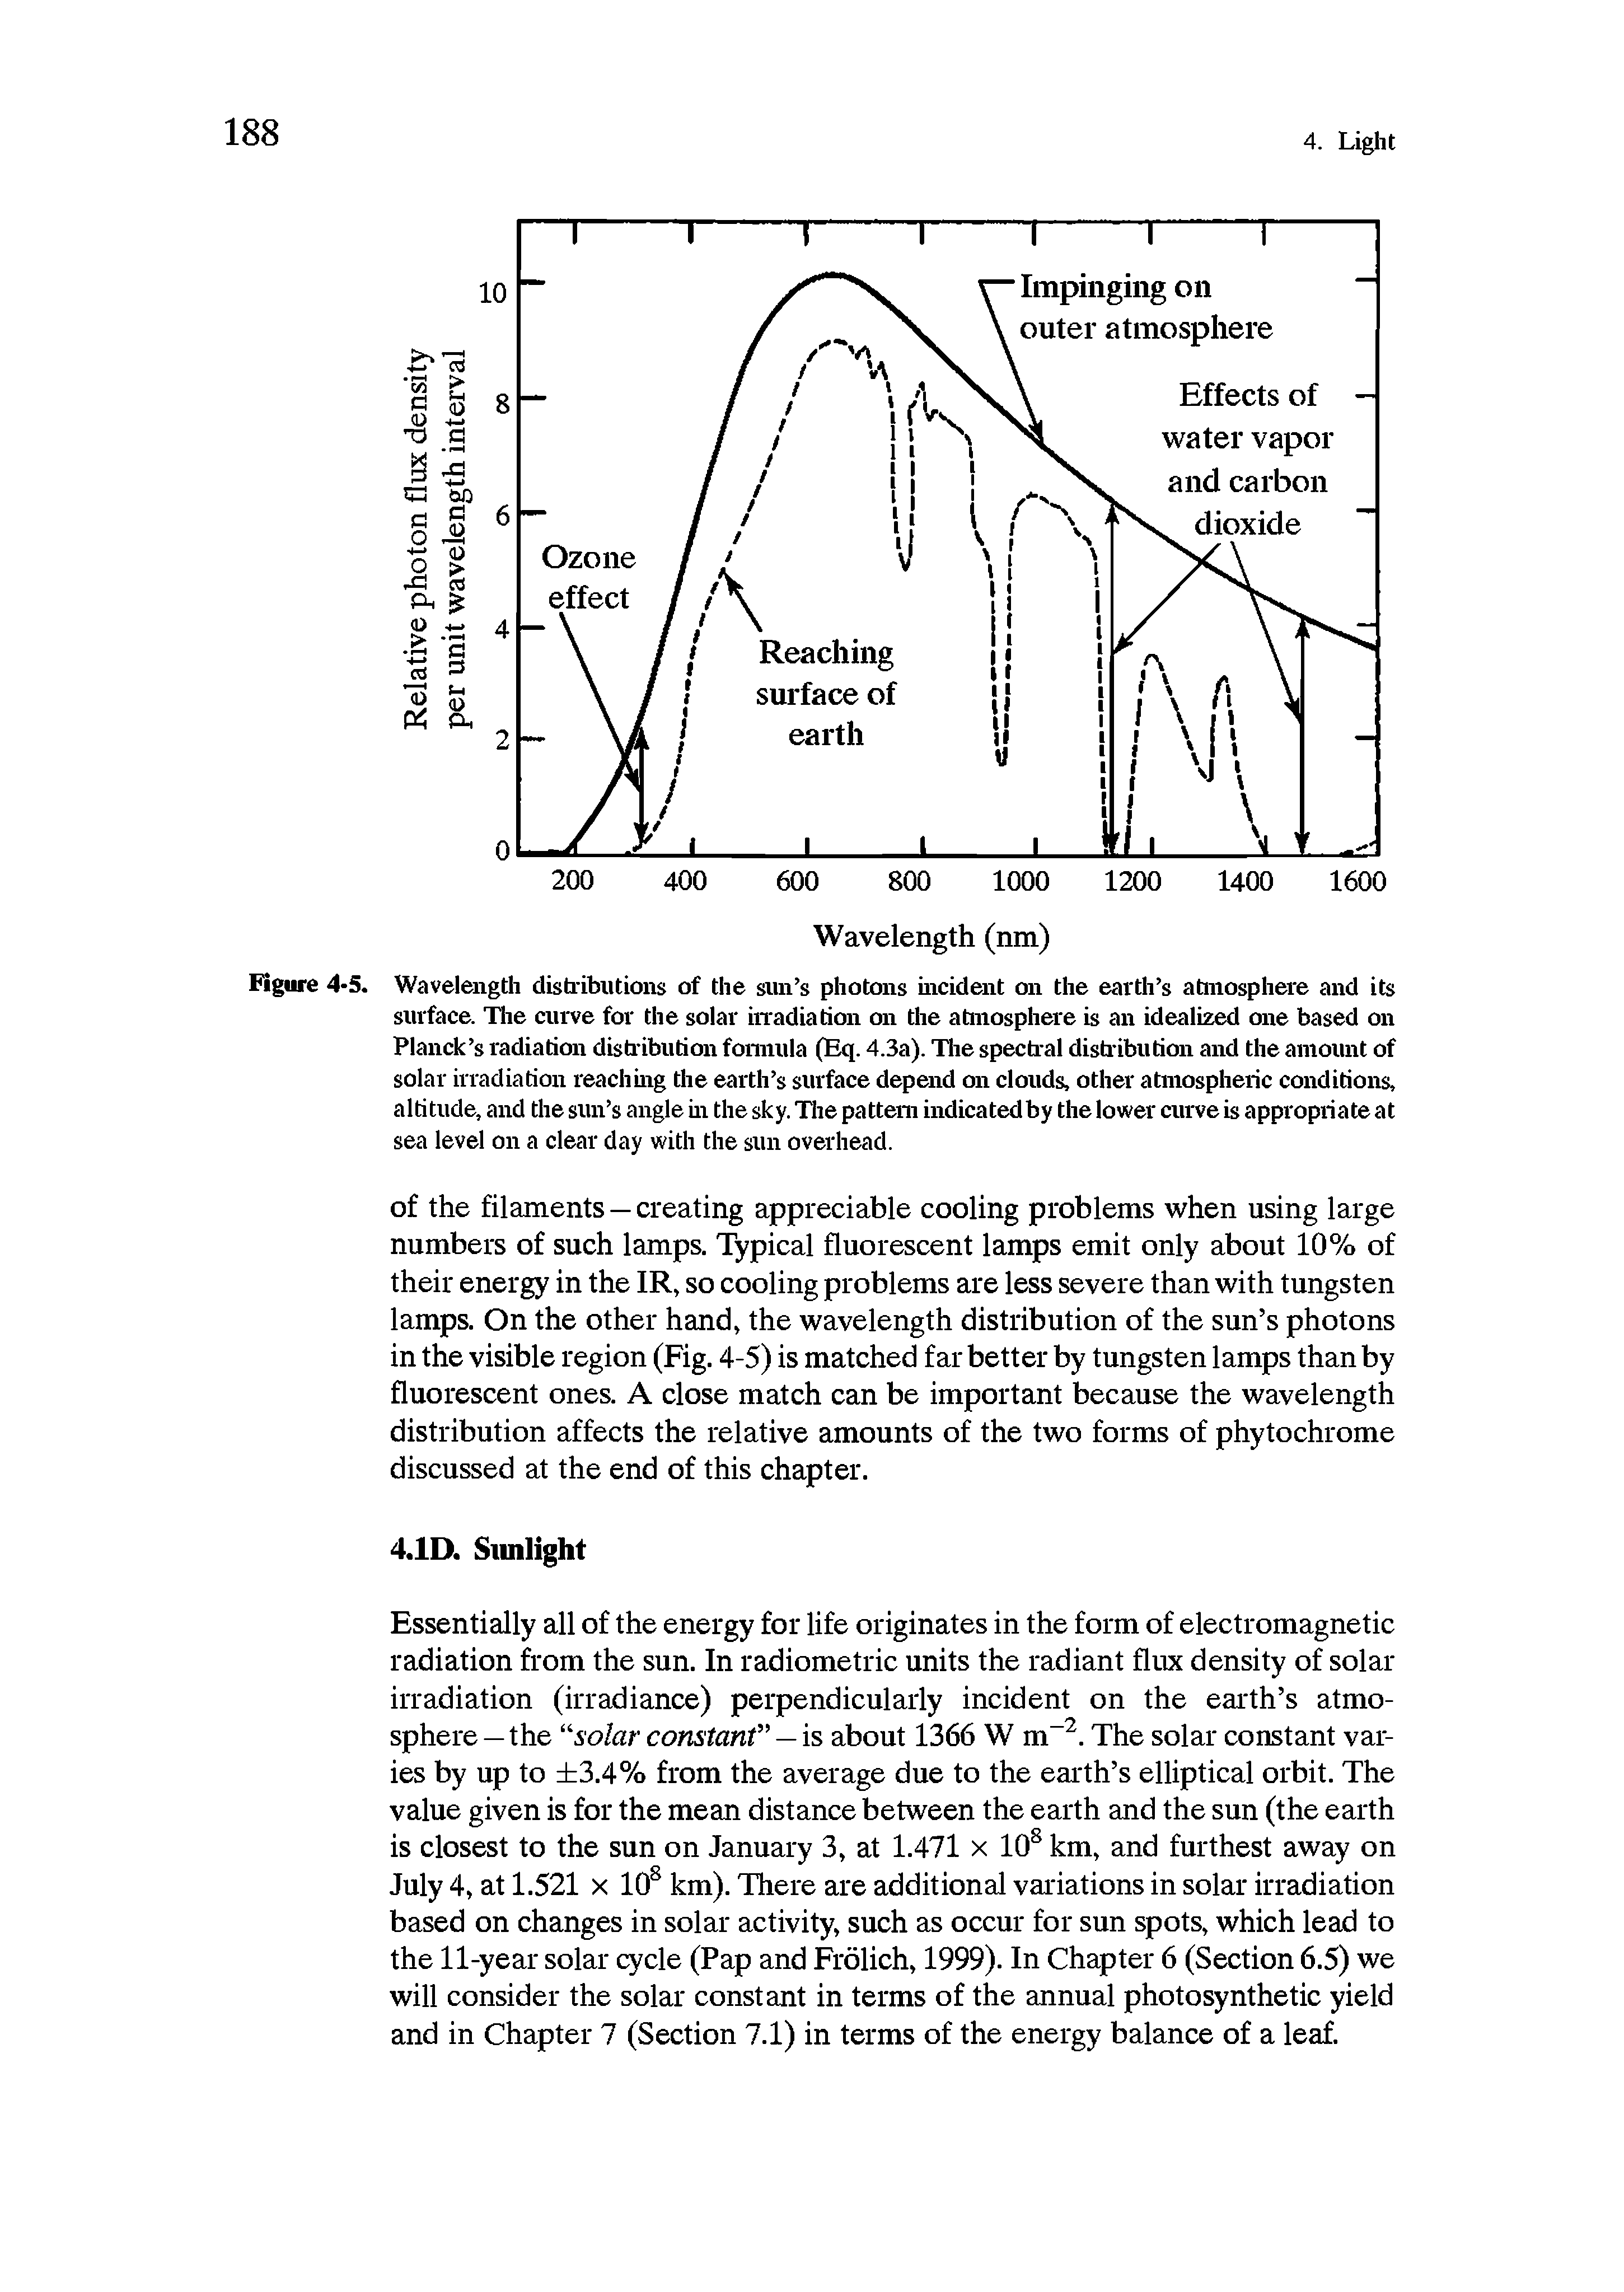 Figure 4-5. Wavelength distributions of the sun s photons incident on the earth s atmosphere and its surface. The curve for the solar irradiation on the atmosphere is an idealized one based on Planck s radiation distribution formula (Eq. 4.3a). The spectral distribution and the amount of solar irradiation reaching the earth s surface depend on clouds, other atmospheric conditions, altitude, and the sun s angle in the sky. The pattern indicatedby the lower curve is appropriate at sea level on a clear day with the sun overhead.